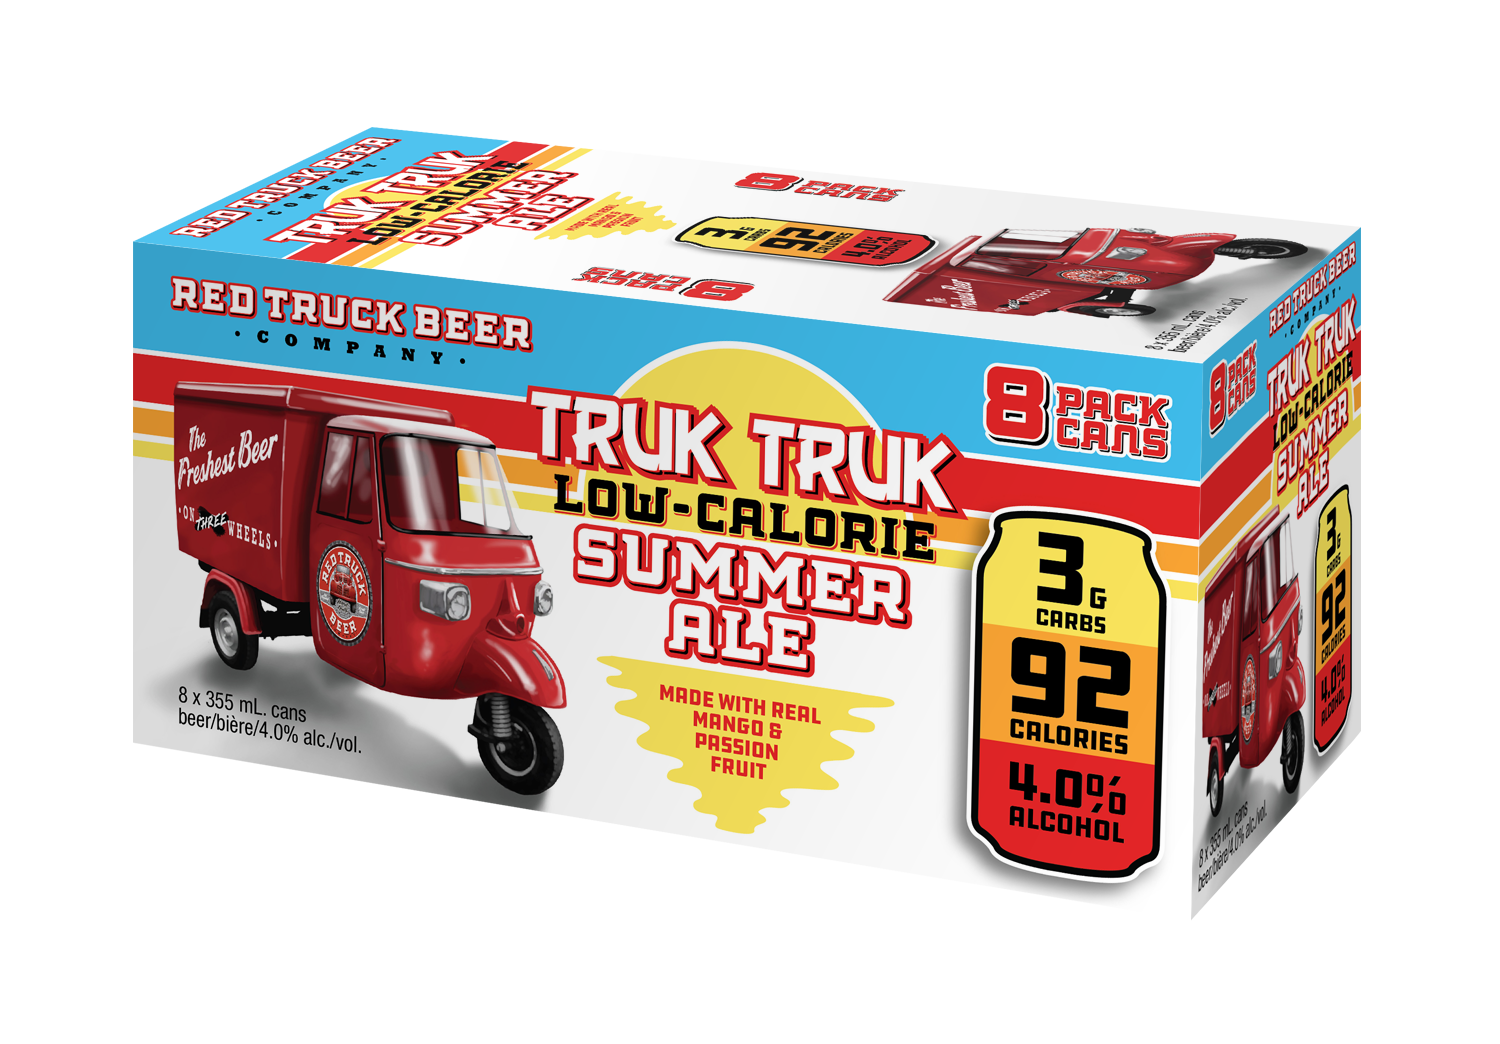 Truk Truk by Red Truck Beer Co.